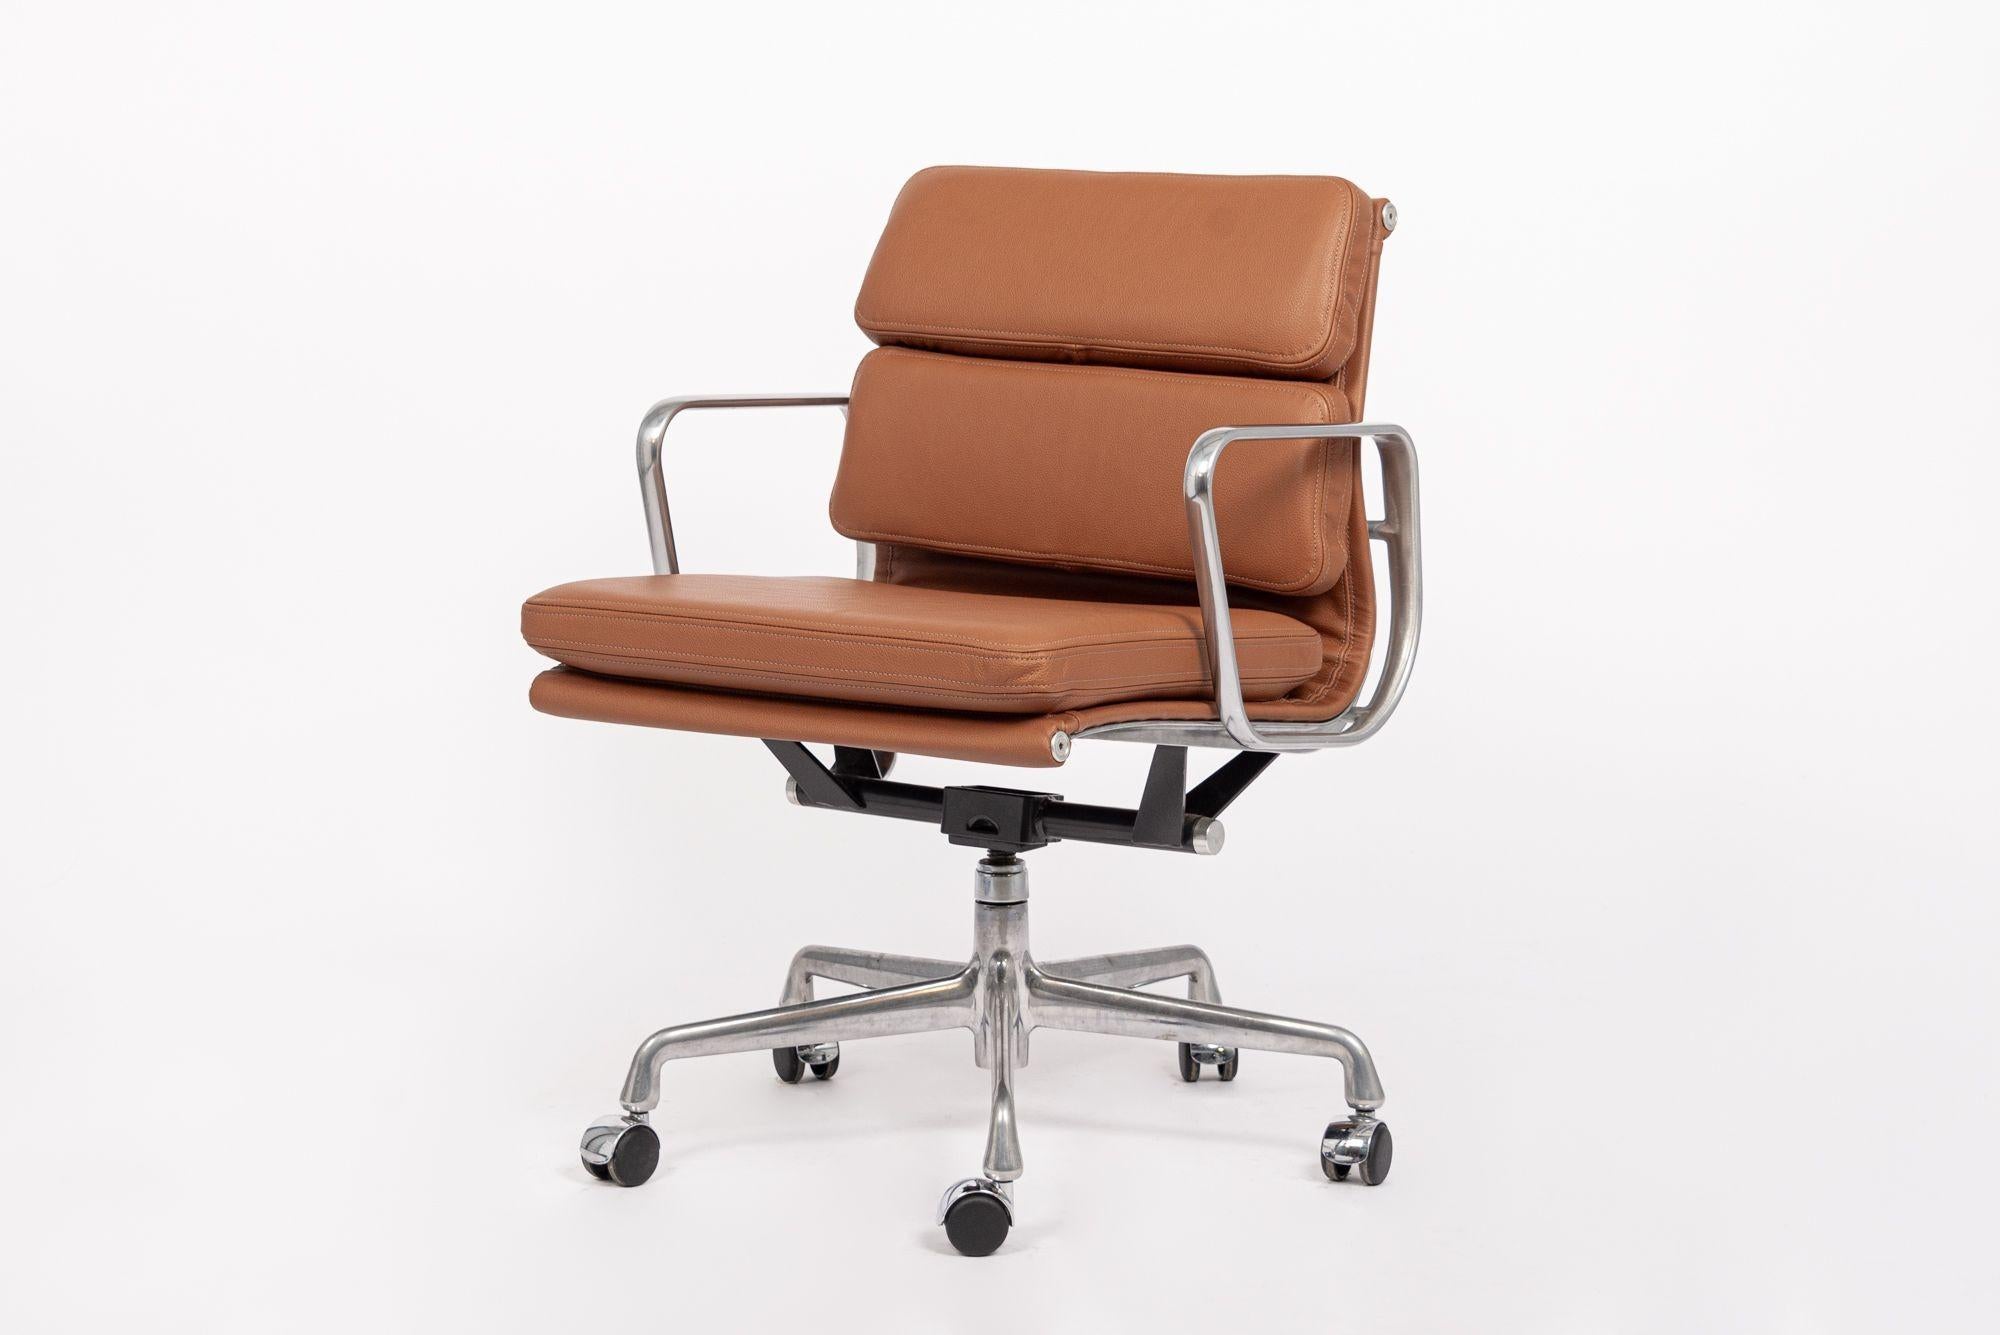 This authentic Eames for Herman Miller Soft Pad Management Height brown leather desk chair from the Aluminum Group Collection was manufactured in the 2000s. This classic mid century modern office chair was first introduced in 1969 by Charles and Ray